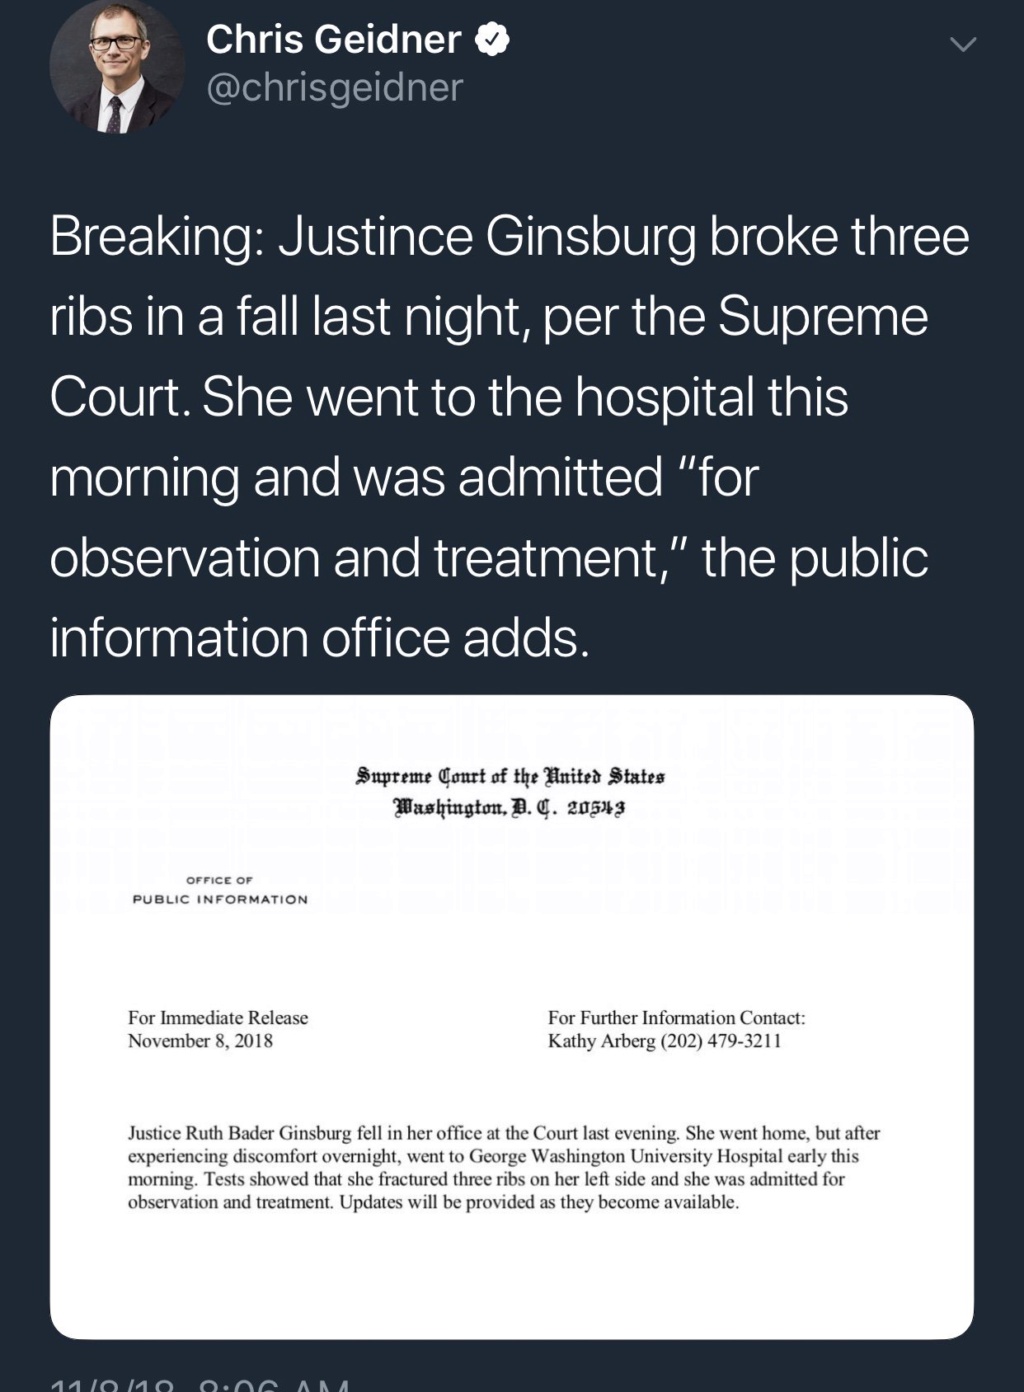 Supreme Court Justice Ruth Bader Ginsburg Fractures 3 Ribs in Fall (And the Crowd Goes Wild) Rbg_fr10